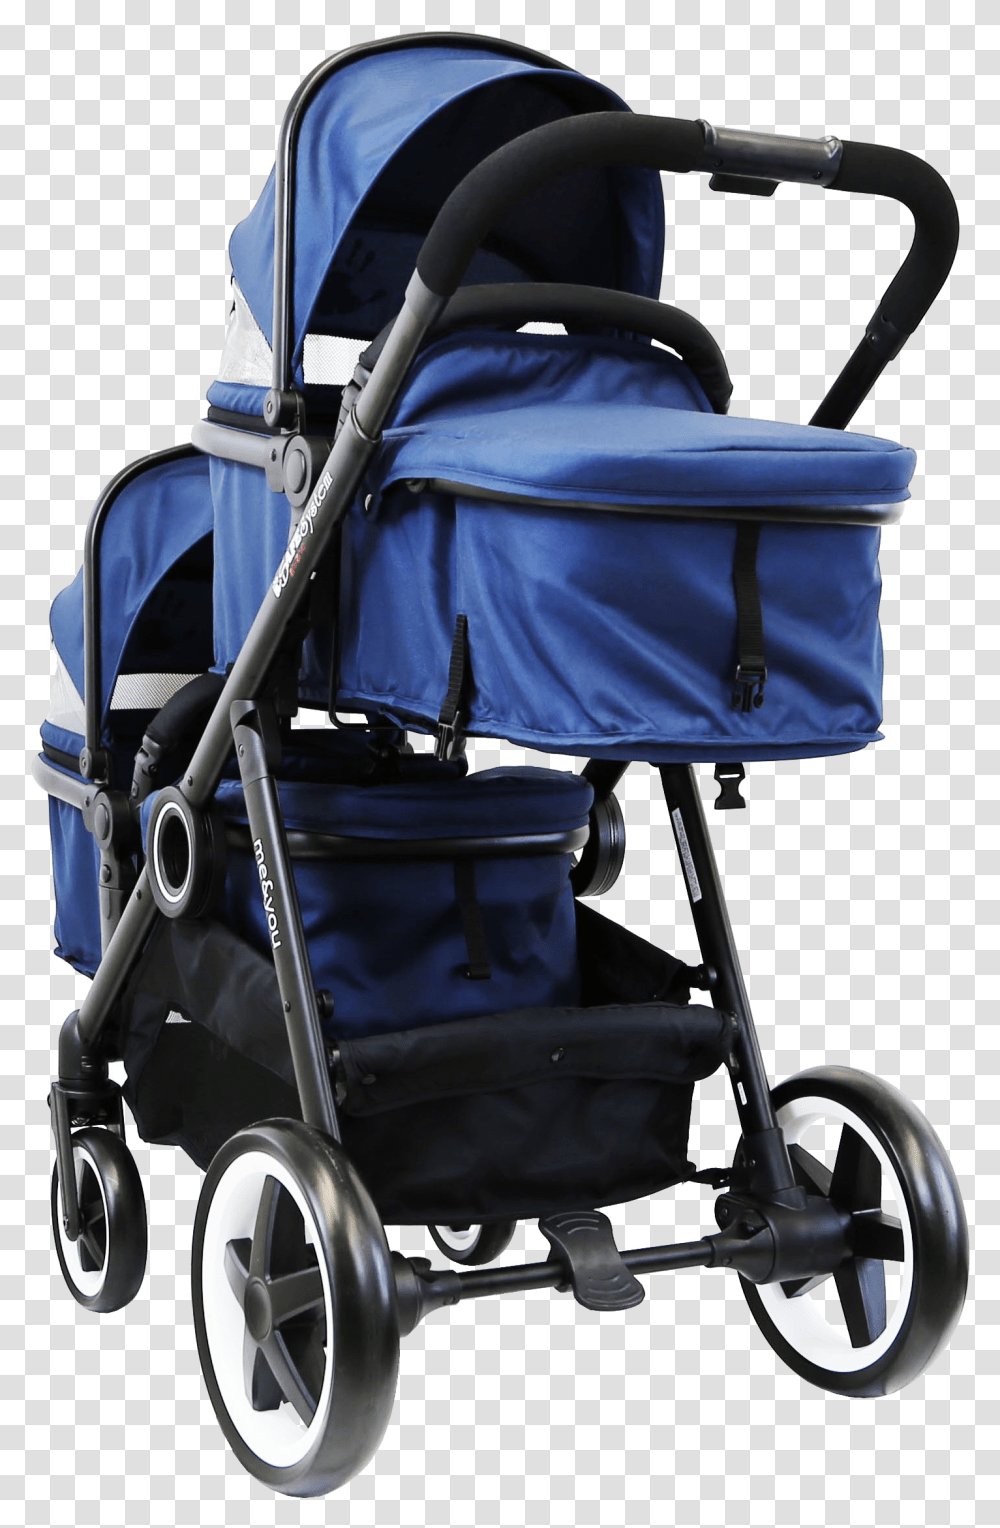 Baby Carriage Download Baby Carriage, Stroller, Backpack, Bag, Chair Transparent Png